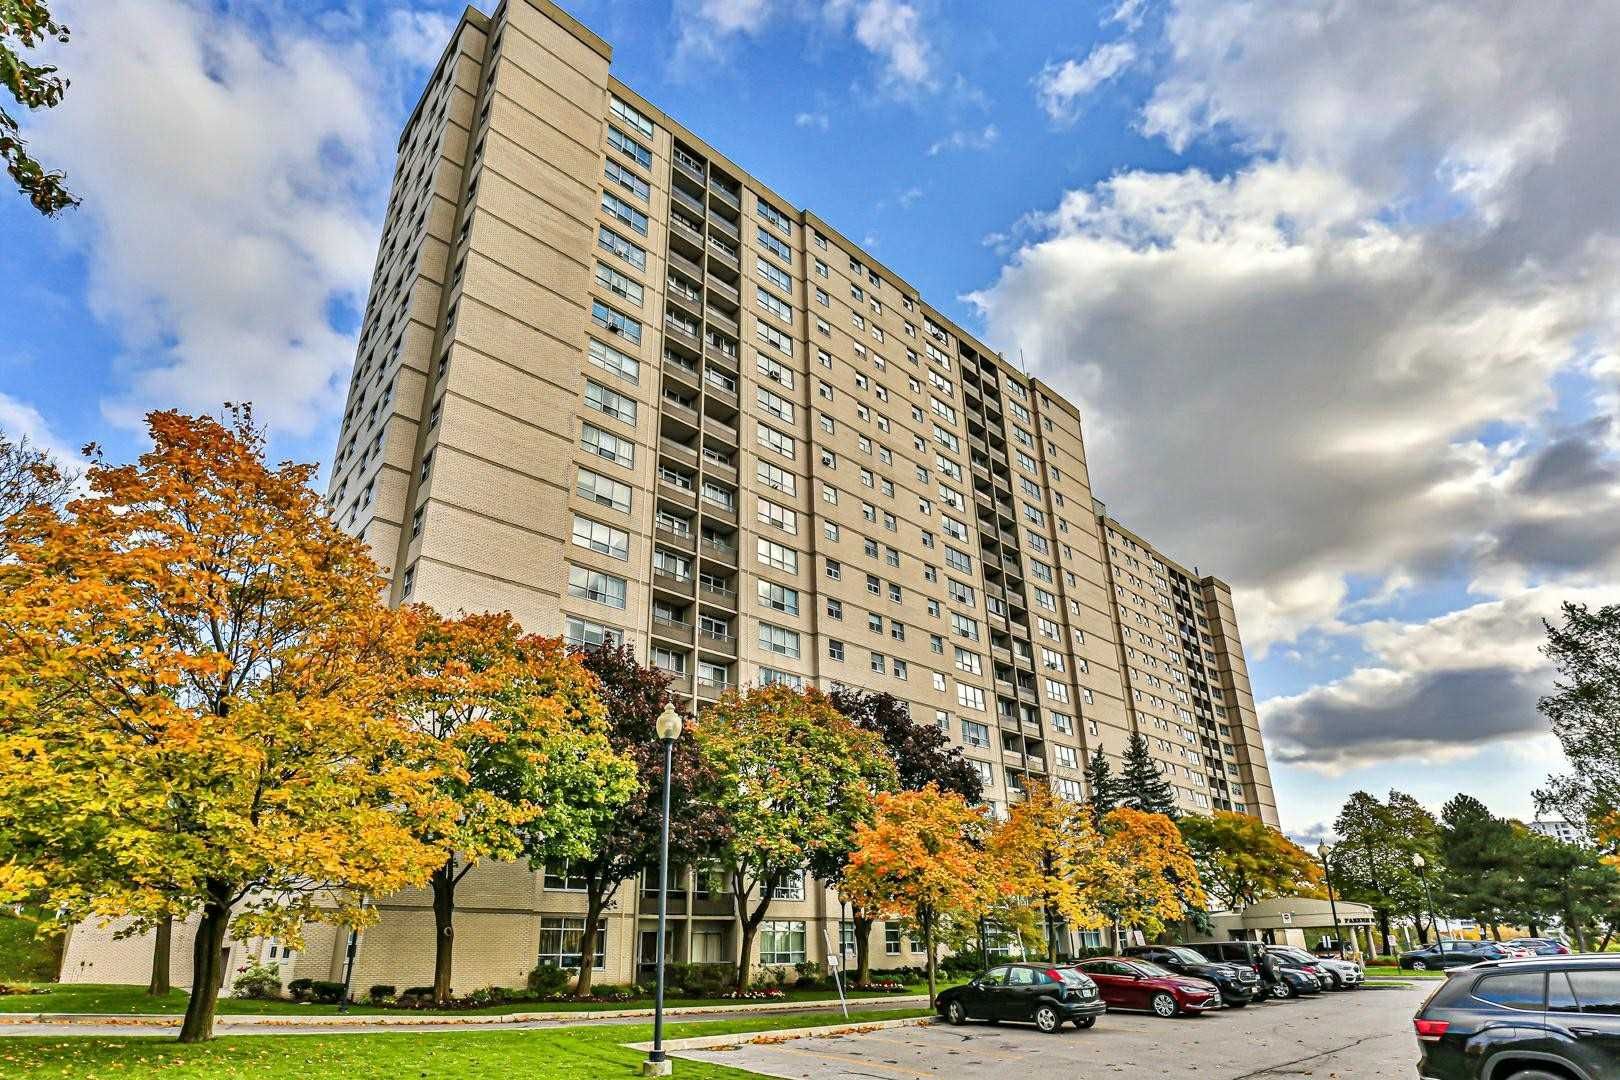 5 Parkway Forest Dr. This condo at York Gardens Condos is located in  North York, Toronto - image #1 of 2 by Strata.ca